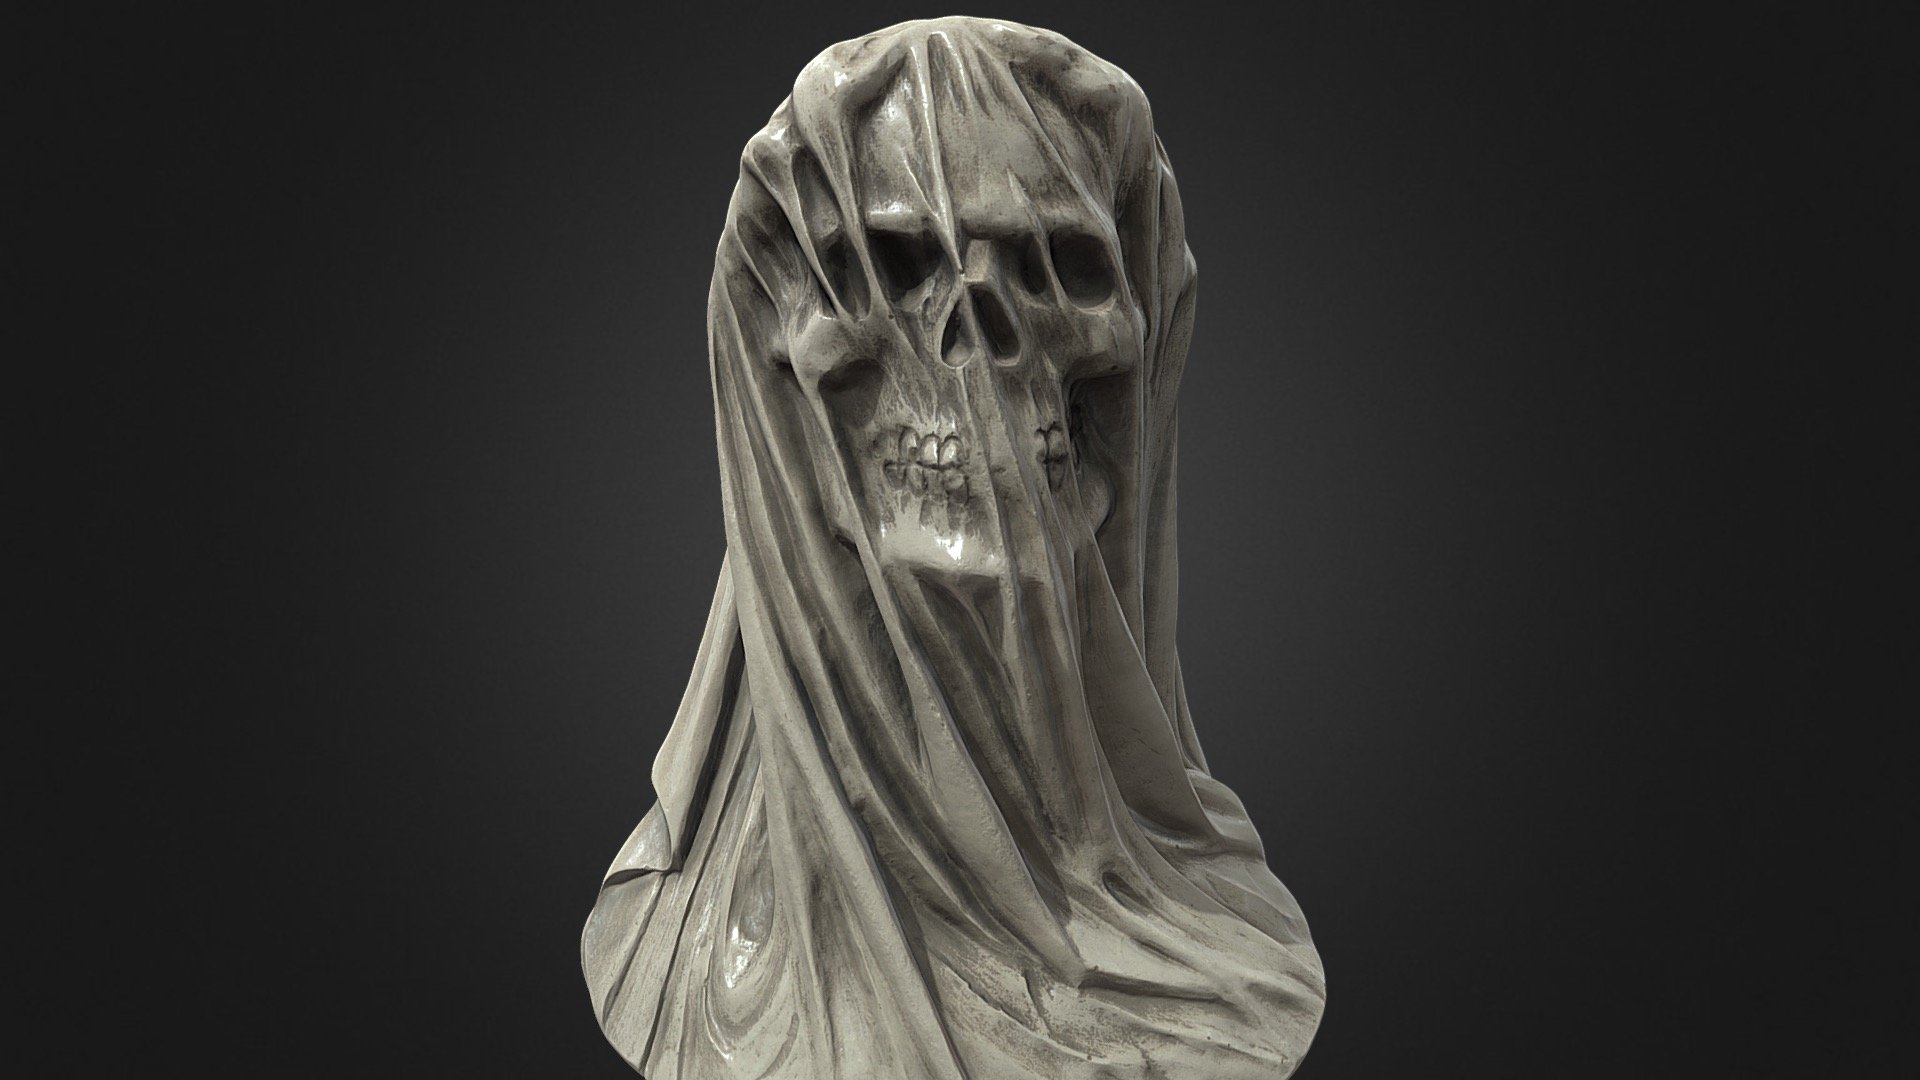 Bride Skull Bust. Halloween Decoration. 3D model made in Reality Capture using 425 images. Additional processing completed in Geomagic Wrap, InstantMeshes, Blender, Substance Designer, and Photoshop - Veiled Bride Skull Bust - Download Free 3D model by JPDV 3d model